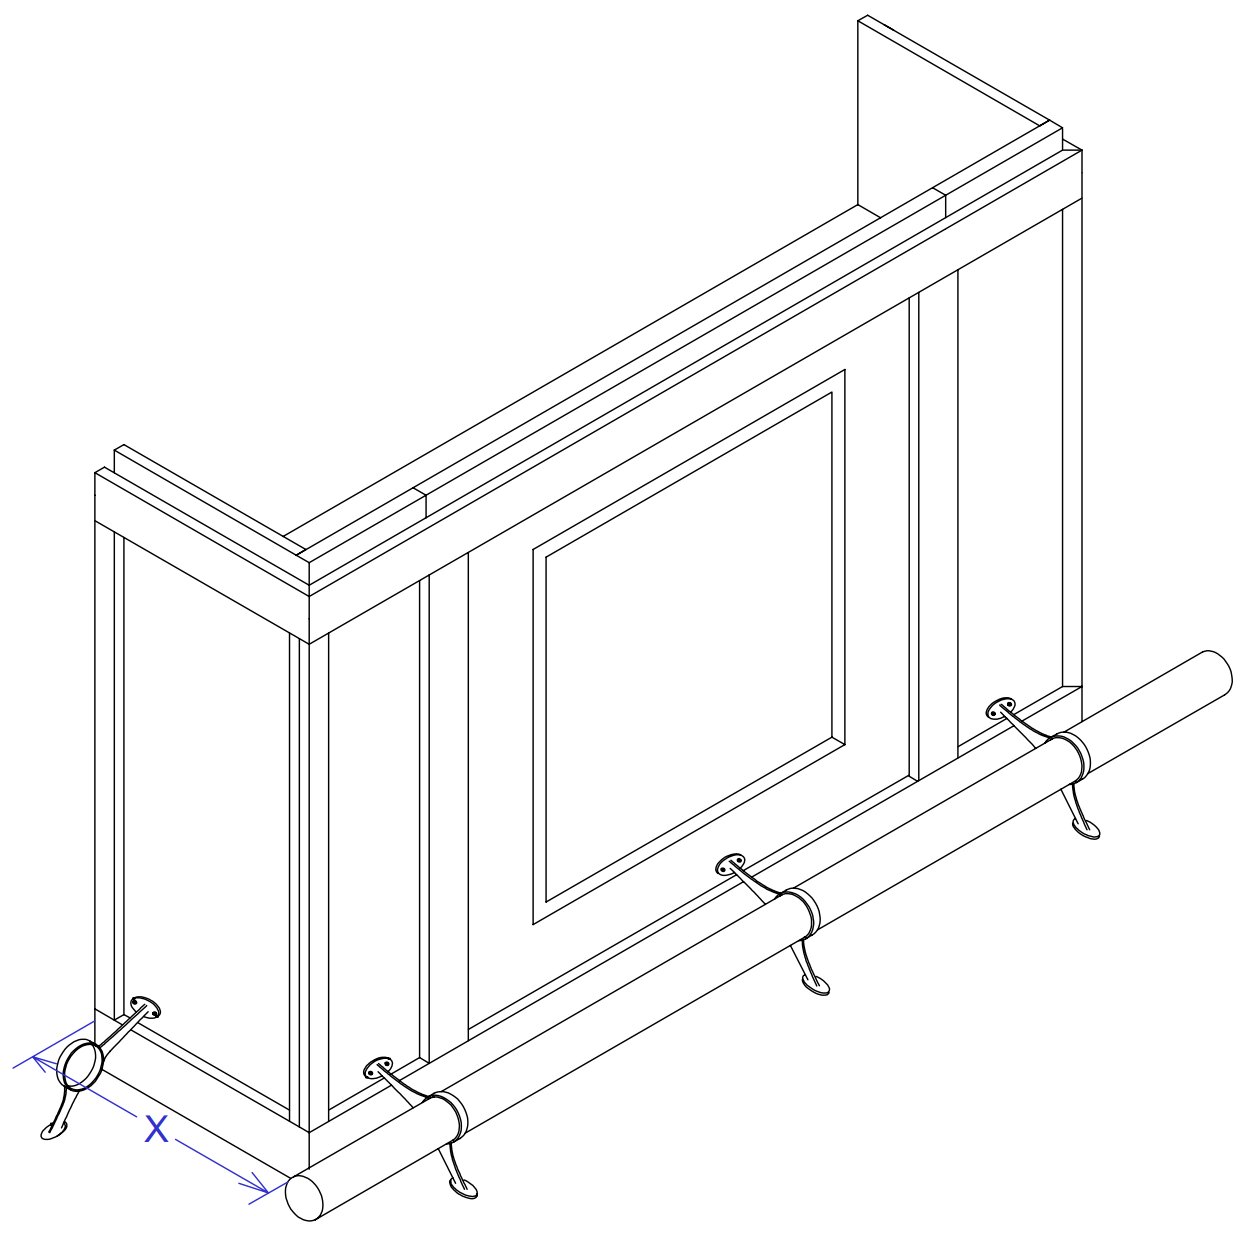 Assembly Drawing - Measure the Side Rail Length